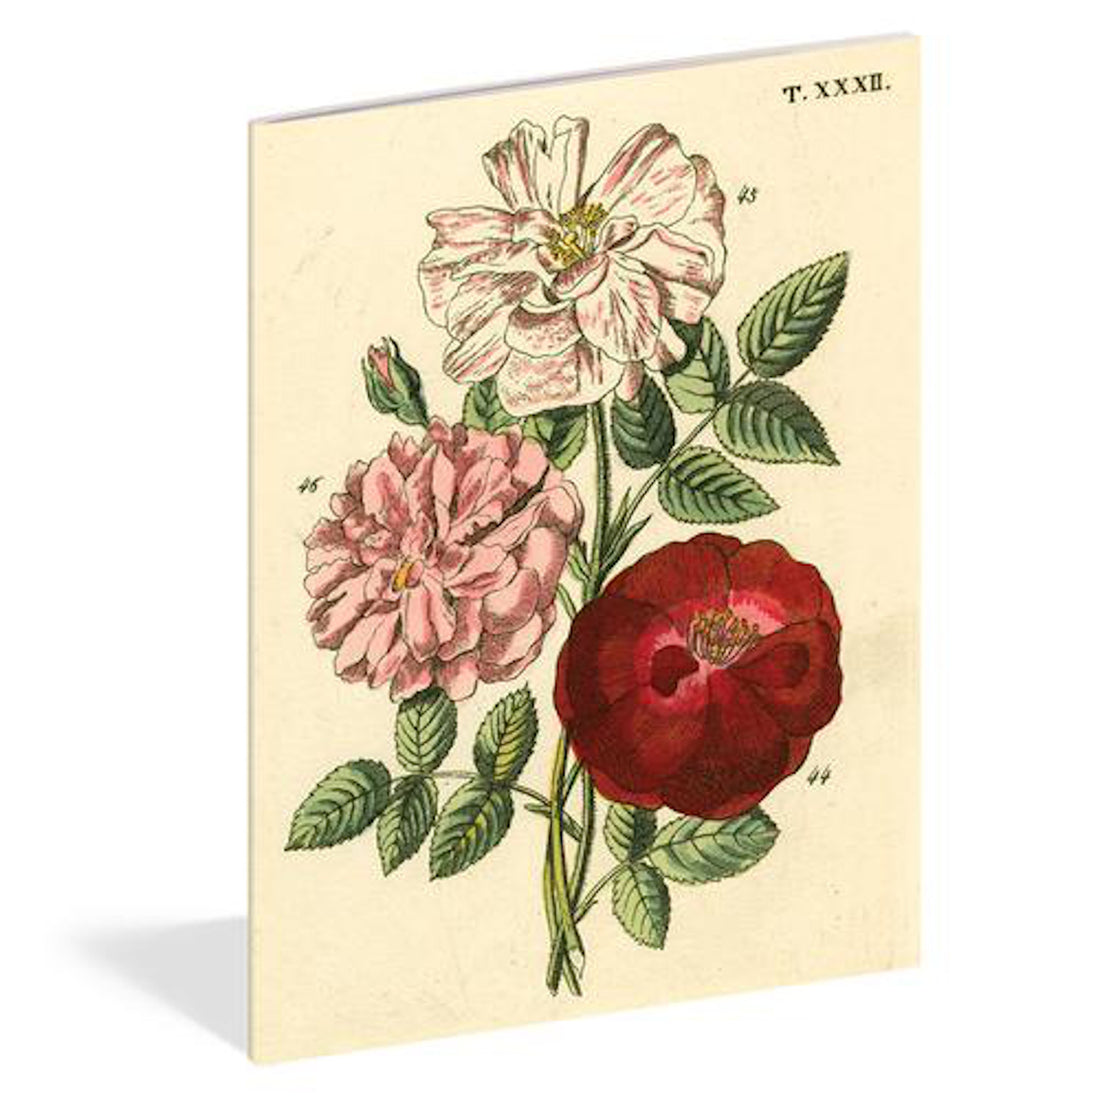 A John Derian: Everything Roses Notebooks, Set of 3 cover adorned with a unique flower drawing.